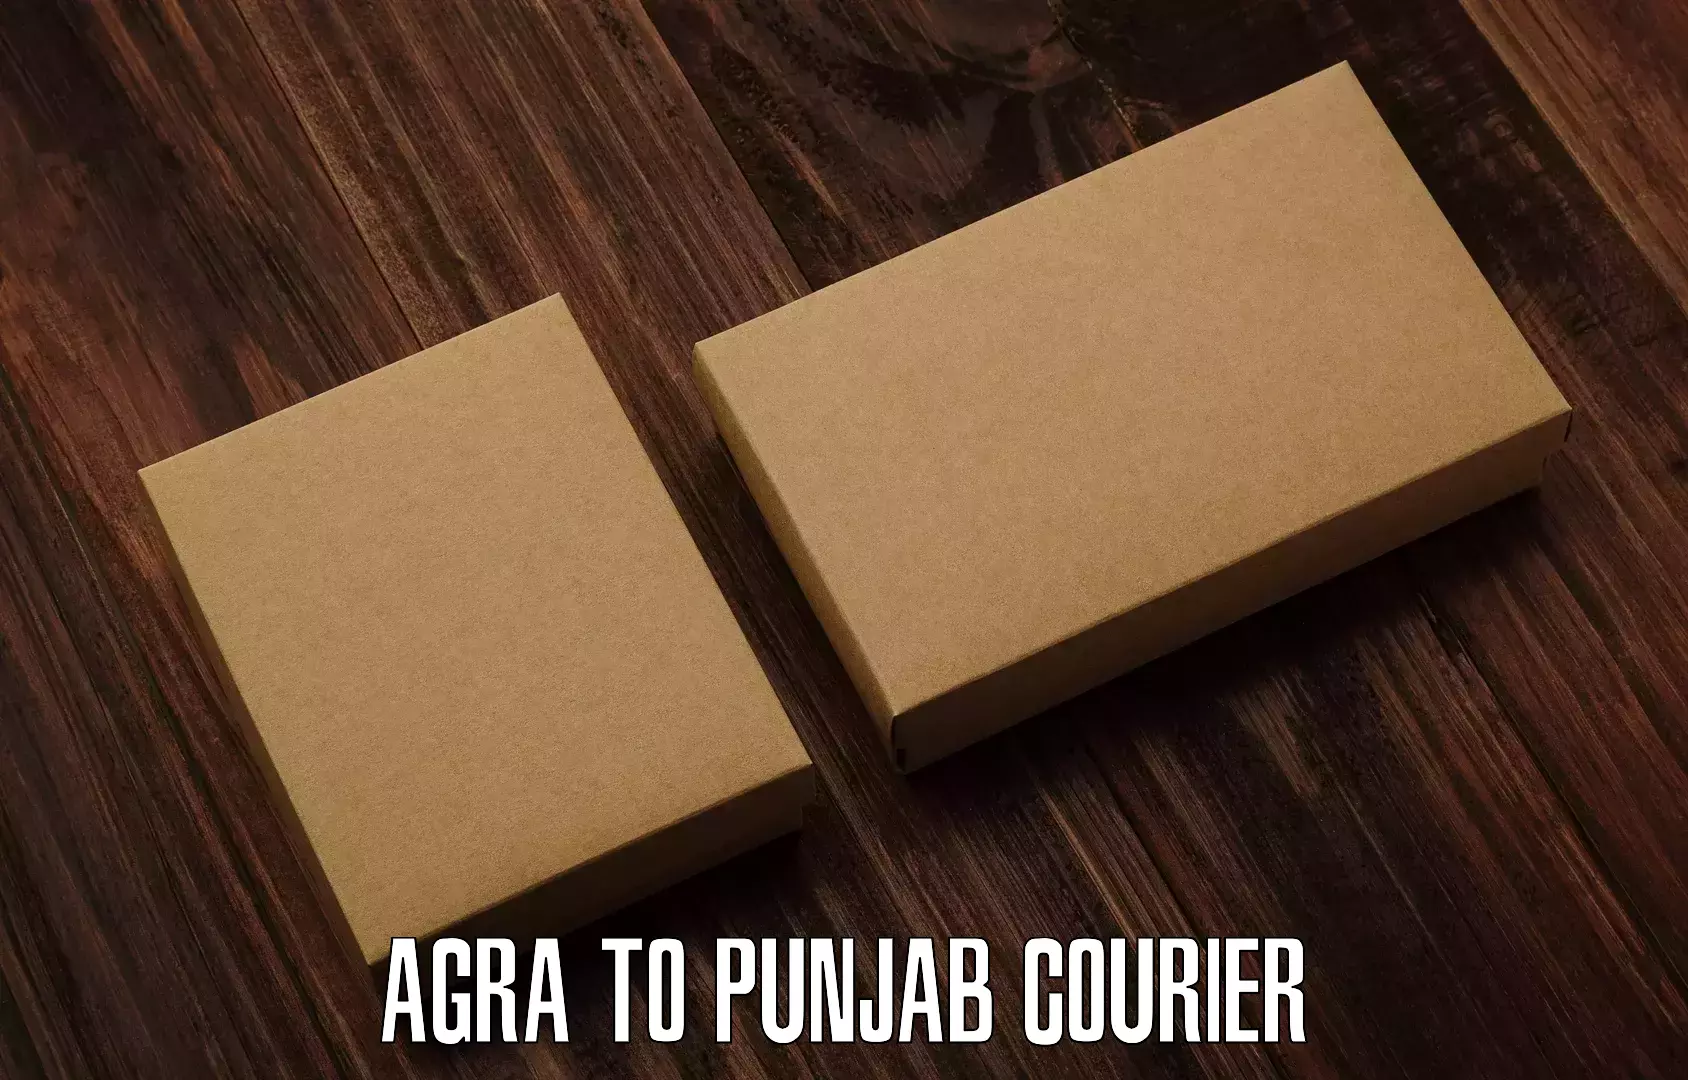 Pharmaceutical courier Agra to Punjab